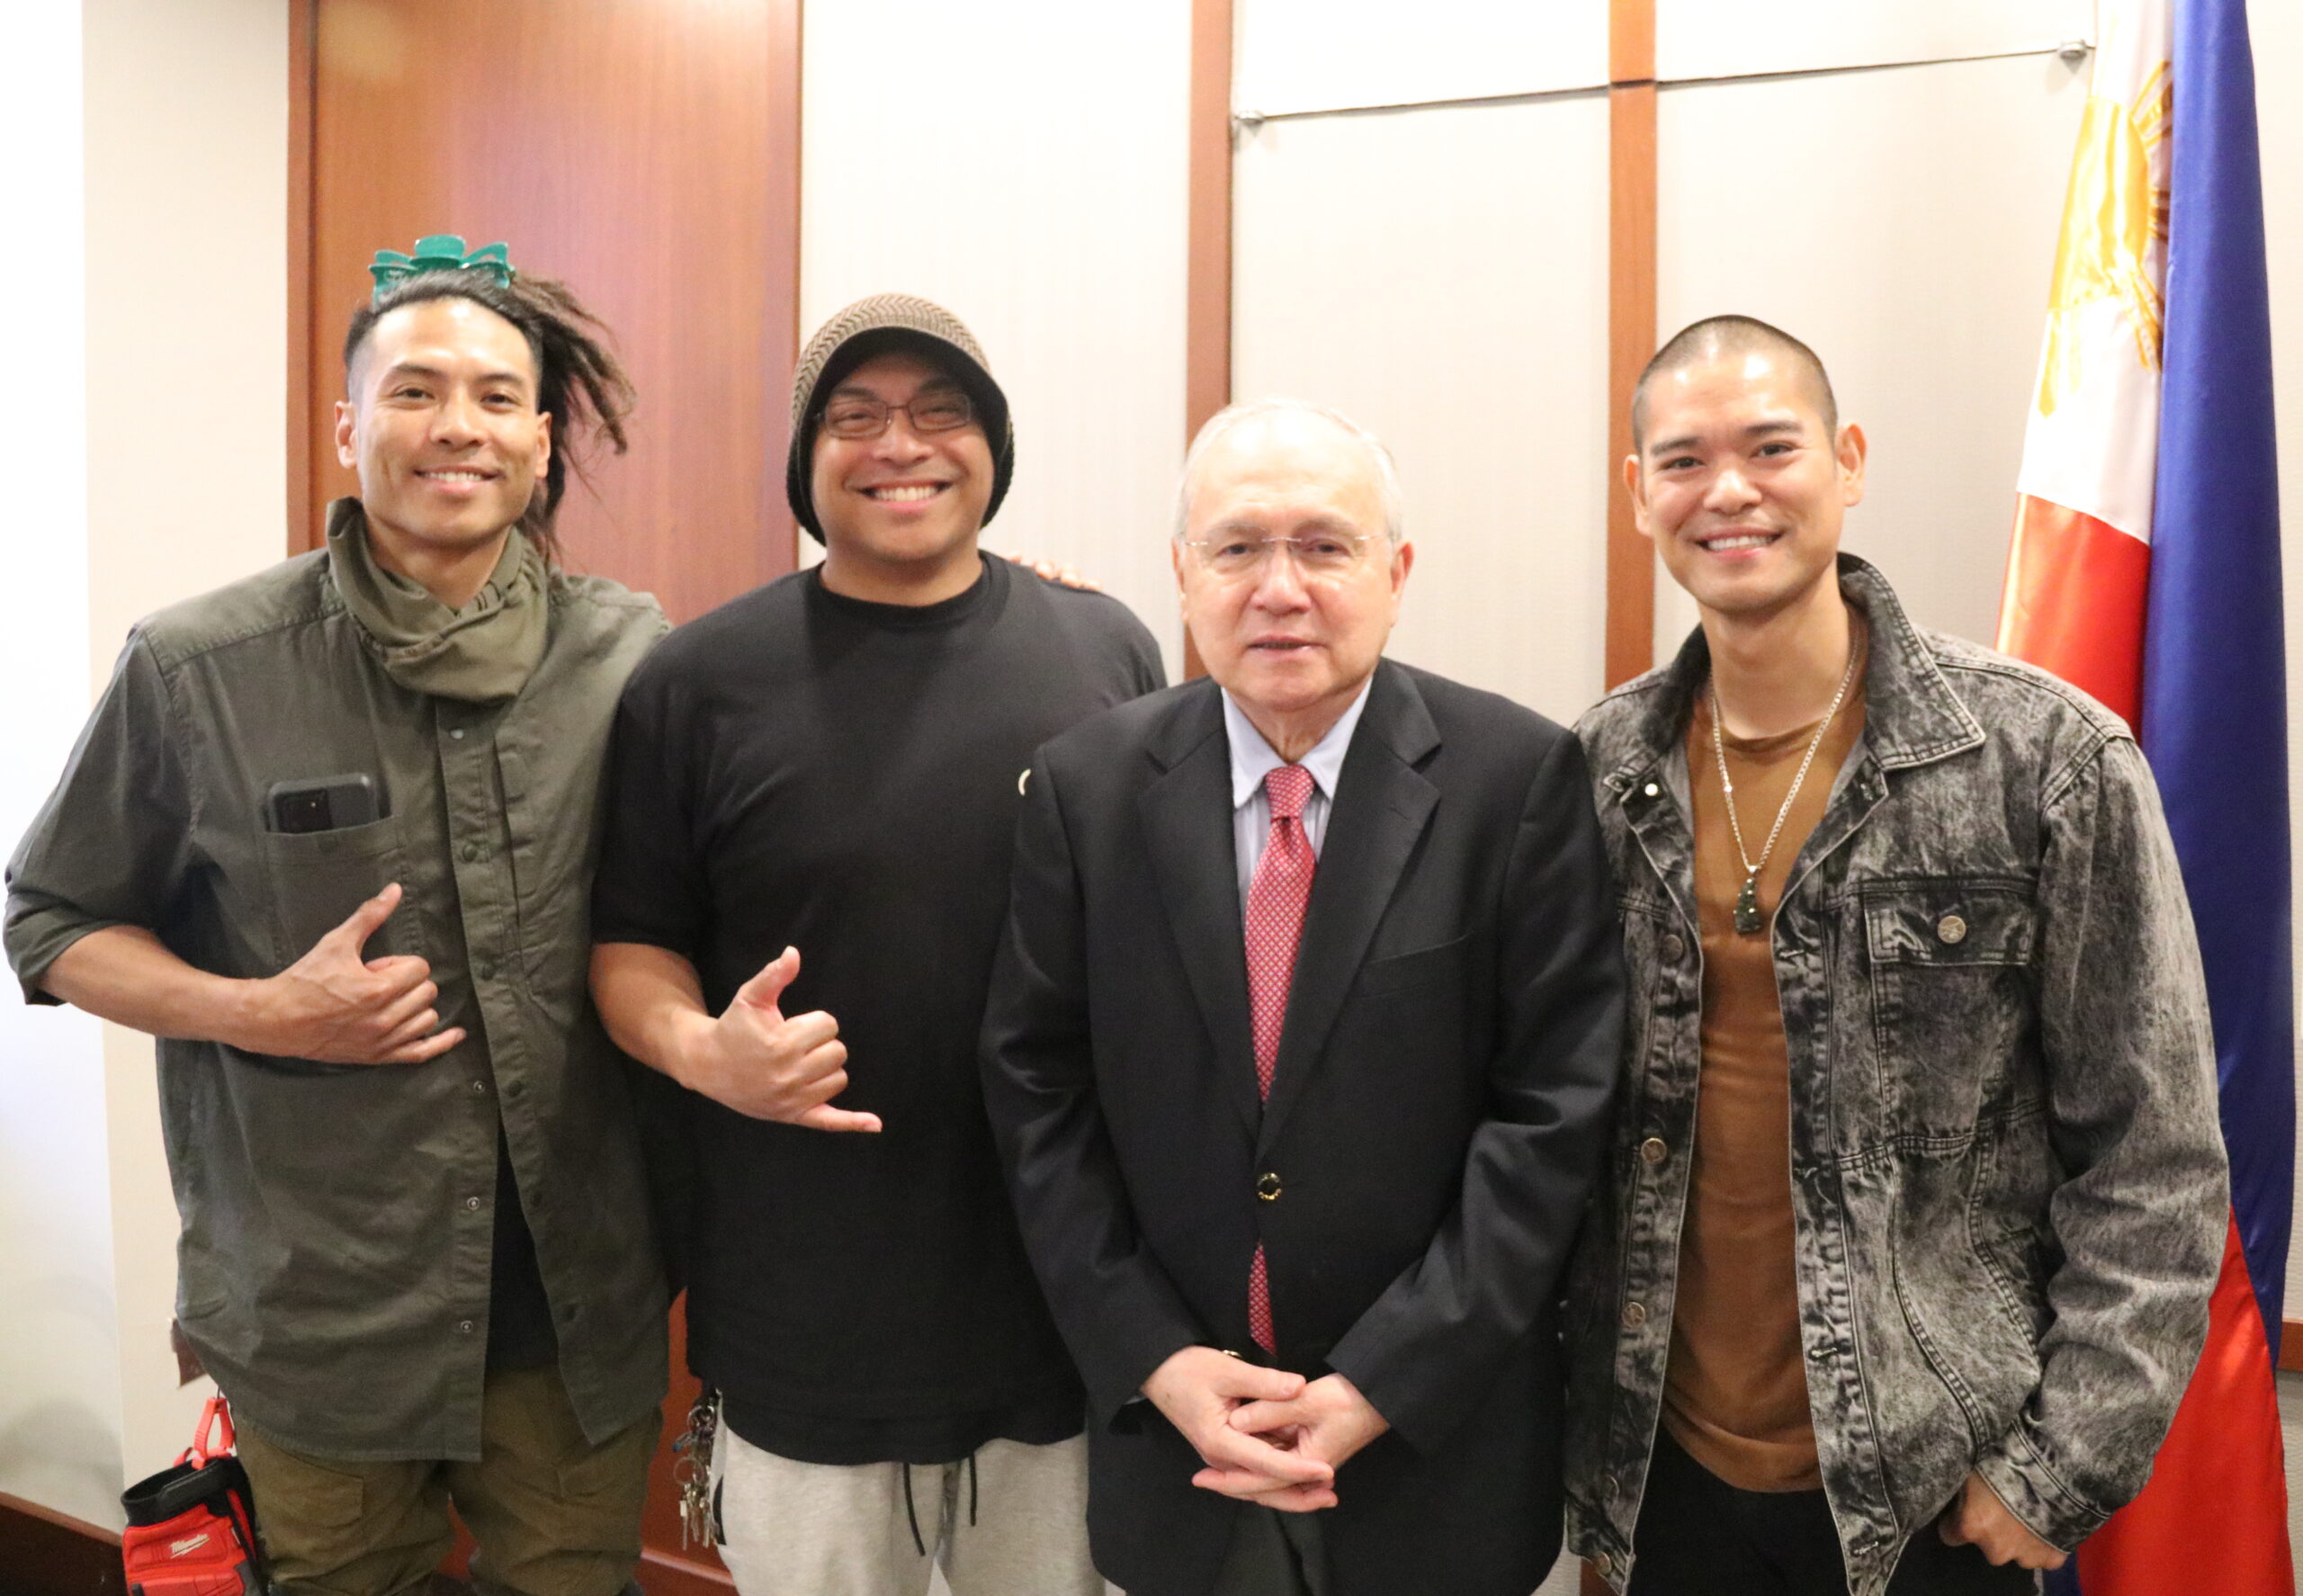 Ambassador Romualdez (second from the right) together with Jay-R (rightmost), Mr. Aaron Canlas (leftmost)  and Mr. Beau Canlas (second to the left) of SNRG Music after their discussion on possible collaborations in promoting Philippine culture and performance arts initiatives involving the Filipino community. 